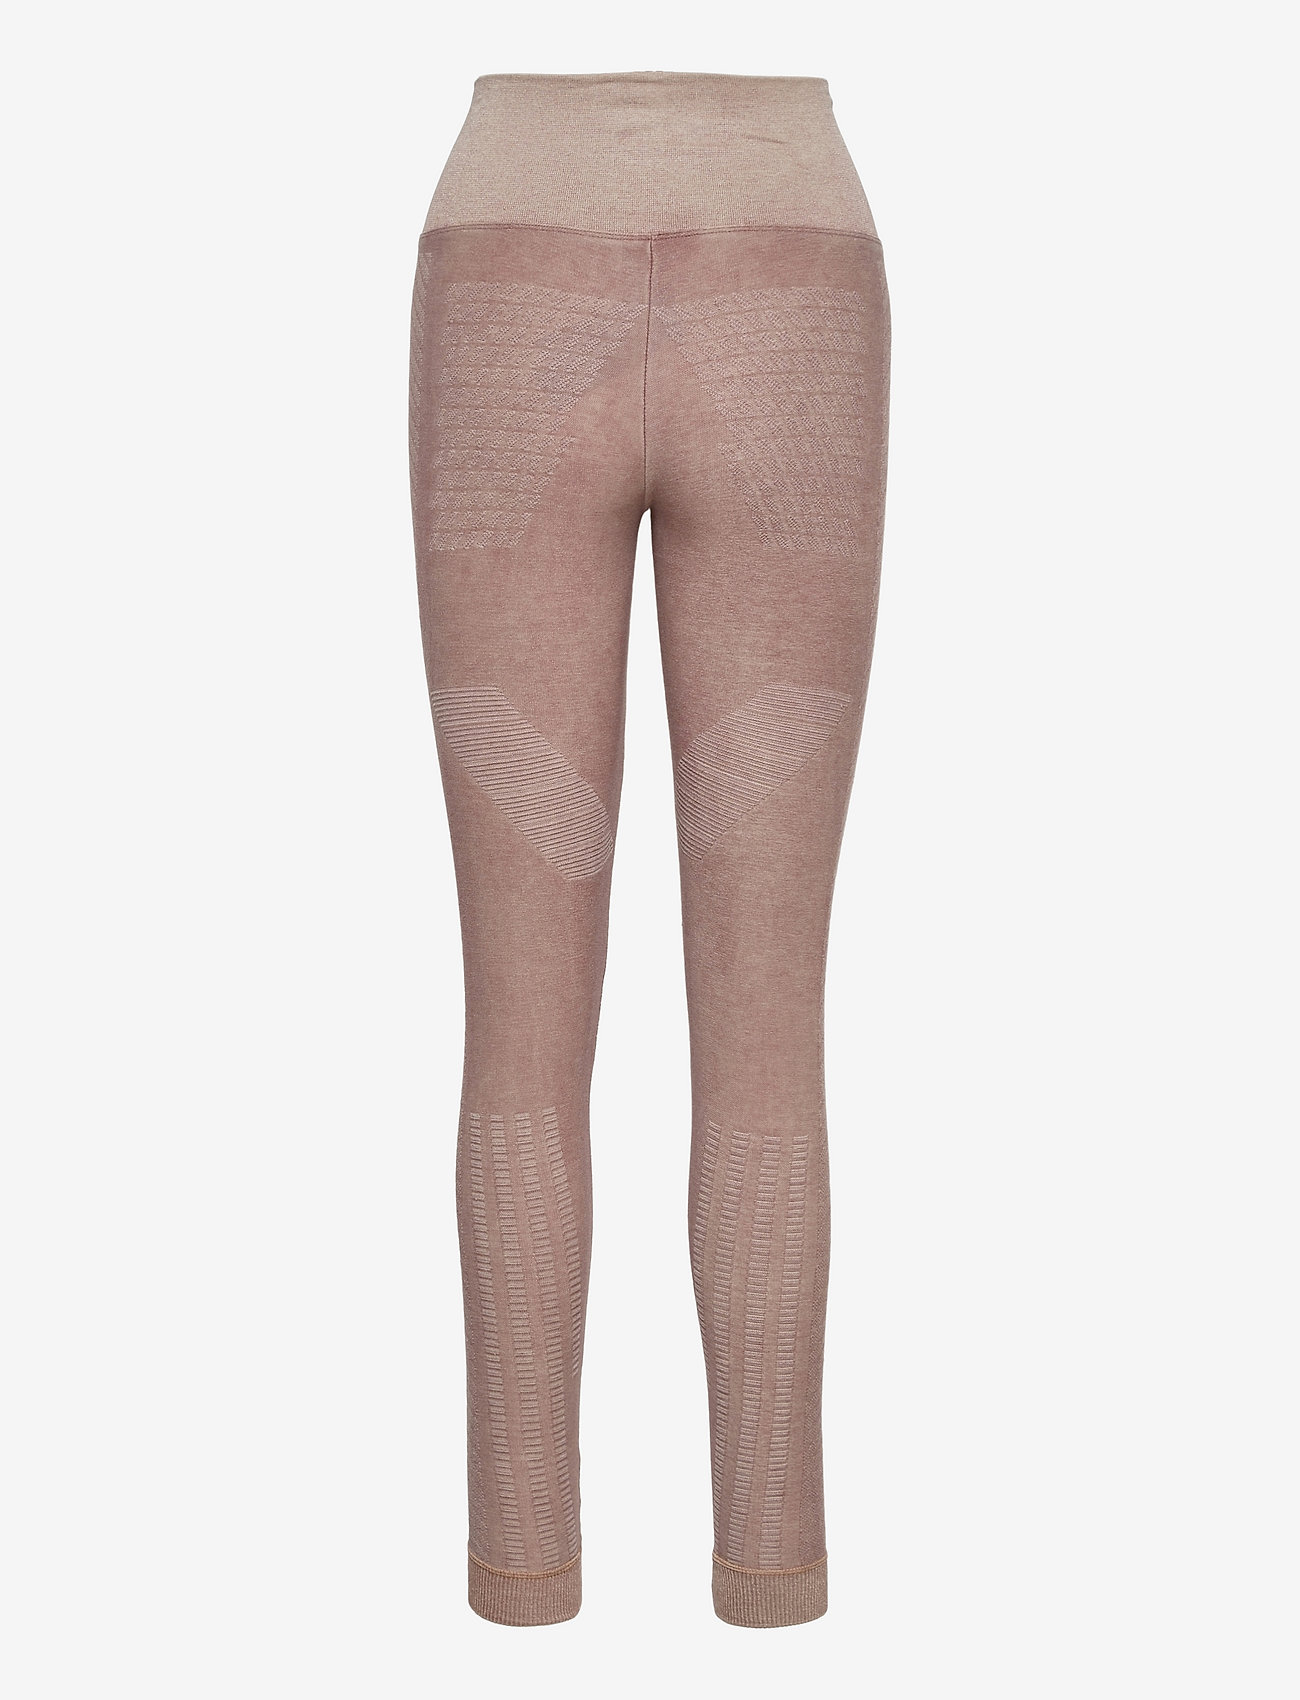 UYN - LADY TO-BE OW PANT LONG - timpės - chocolate - 1